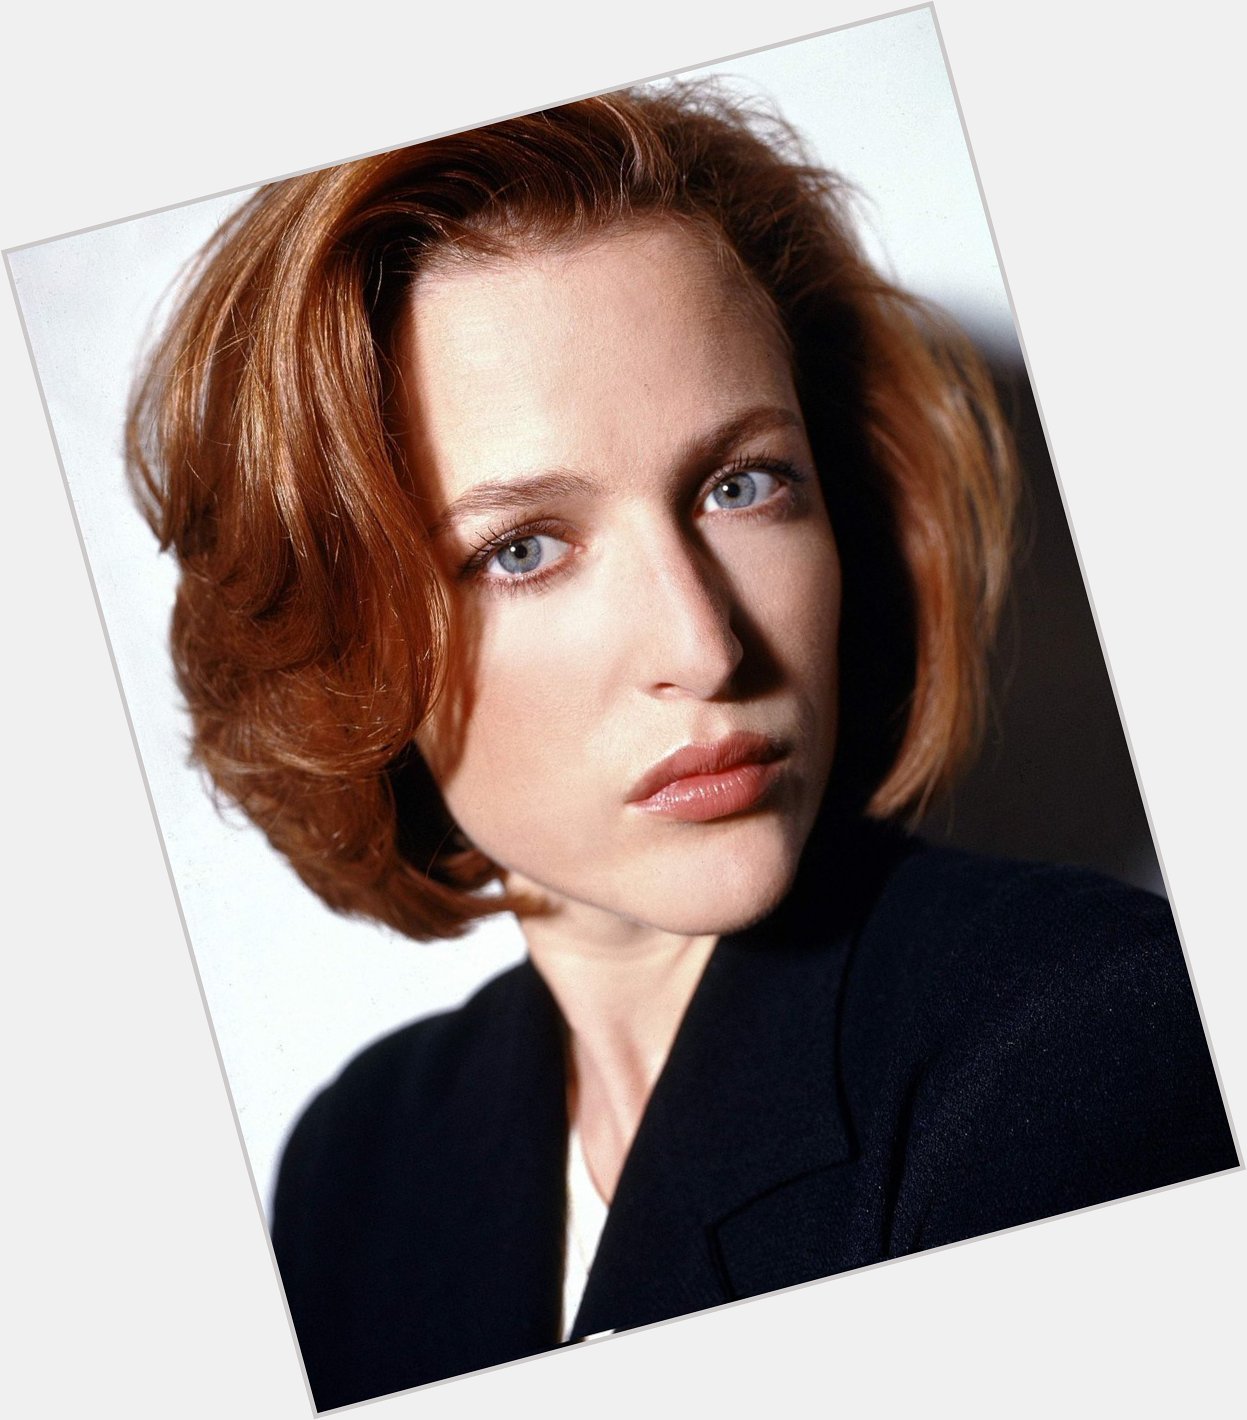 HAPPY BIRTHDAY GILLIAN ANDERSON!
Special Agent Dana Katherine Scully!   